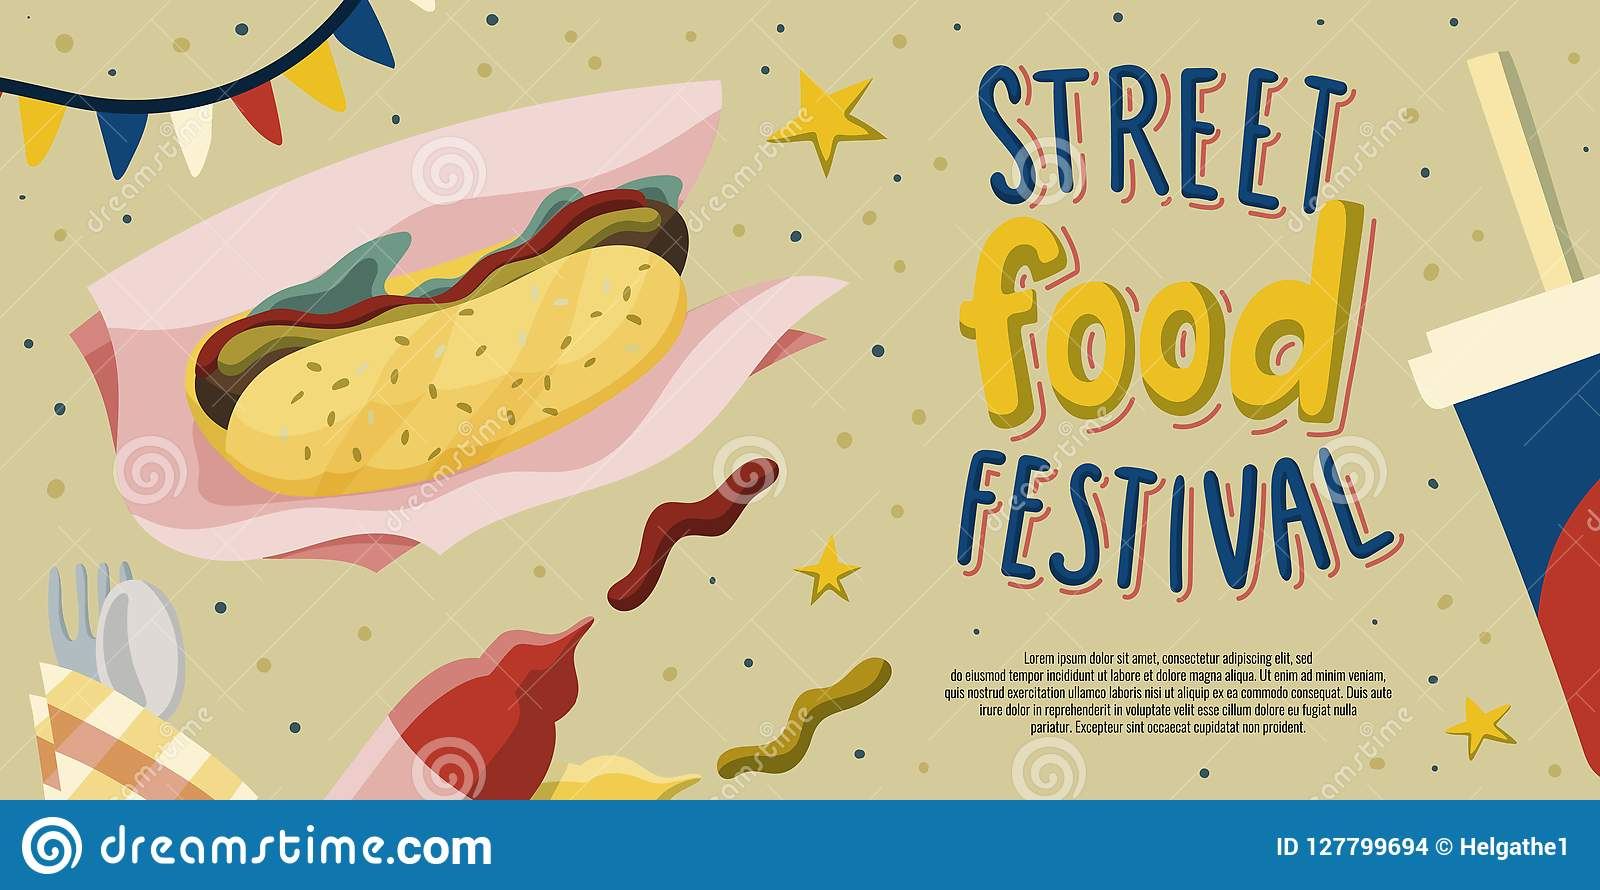 Street Food Festival Flyer Template Design With Hot Dog Throughout Hot Dog Flyer Template